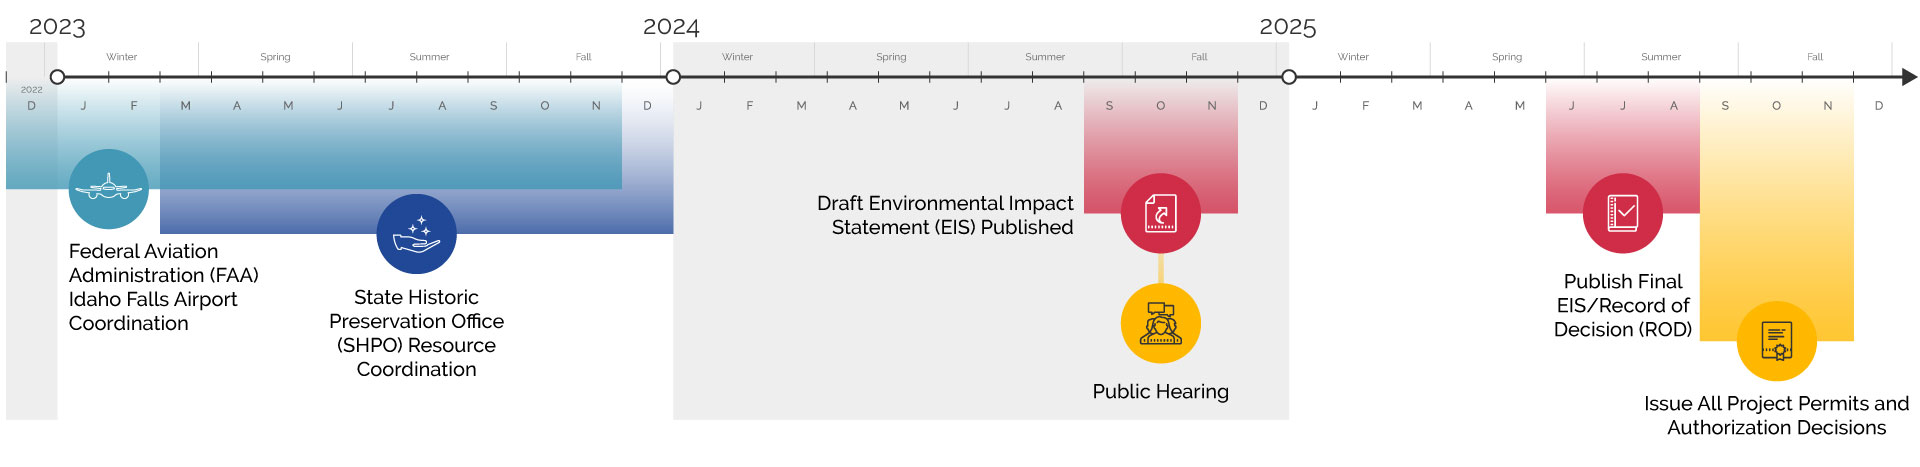 Notice of Intent August 2022. Agency and Public Scoping Meetings: October 2022. Draft EIS Published & 60-Day Comment Period and Public Hearing: July-August 2023. Publish Final EIS for Public Review: Early 2023. Issue FEIS/ROD: Summer 2024. Issue All Project Permits: October 2024.